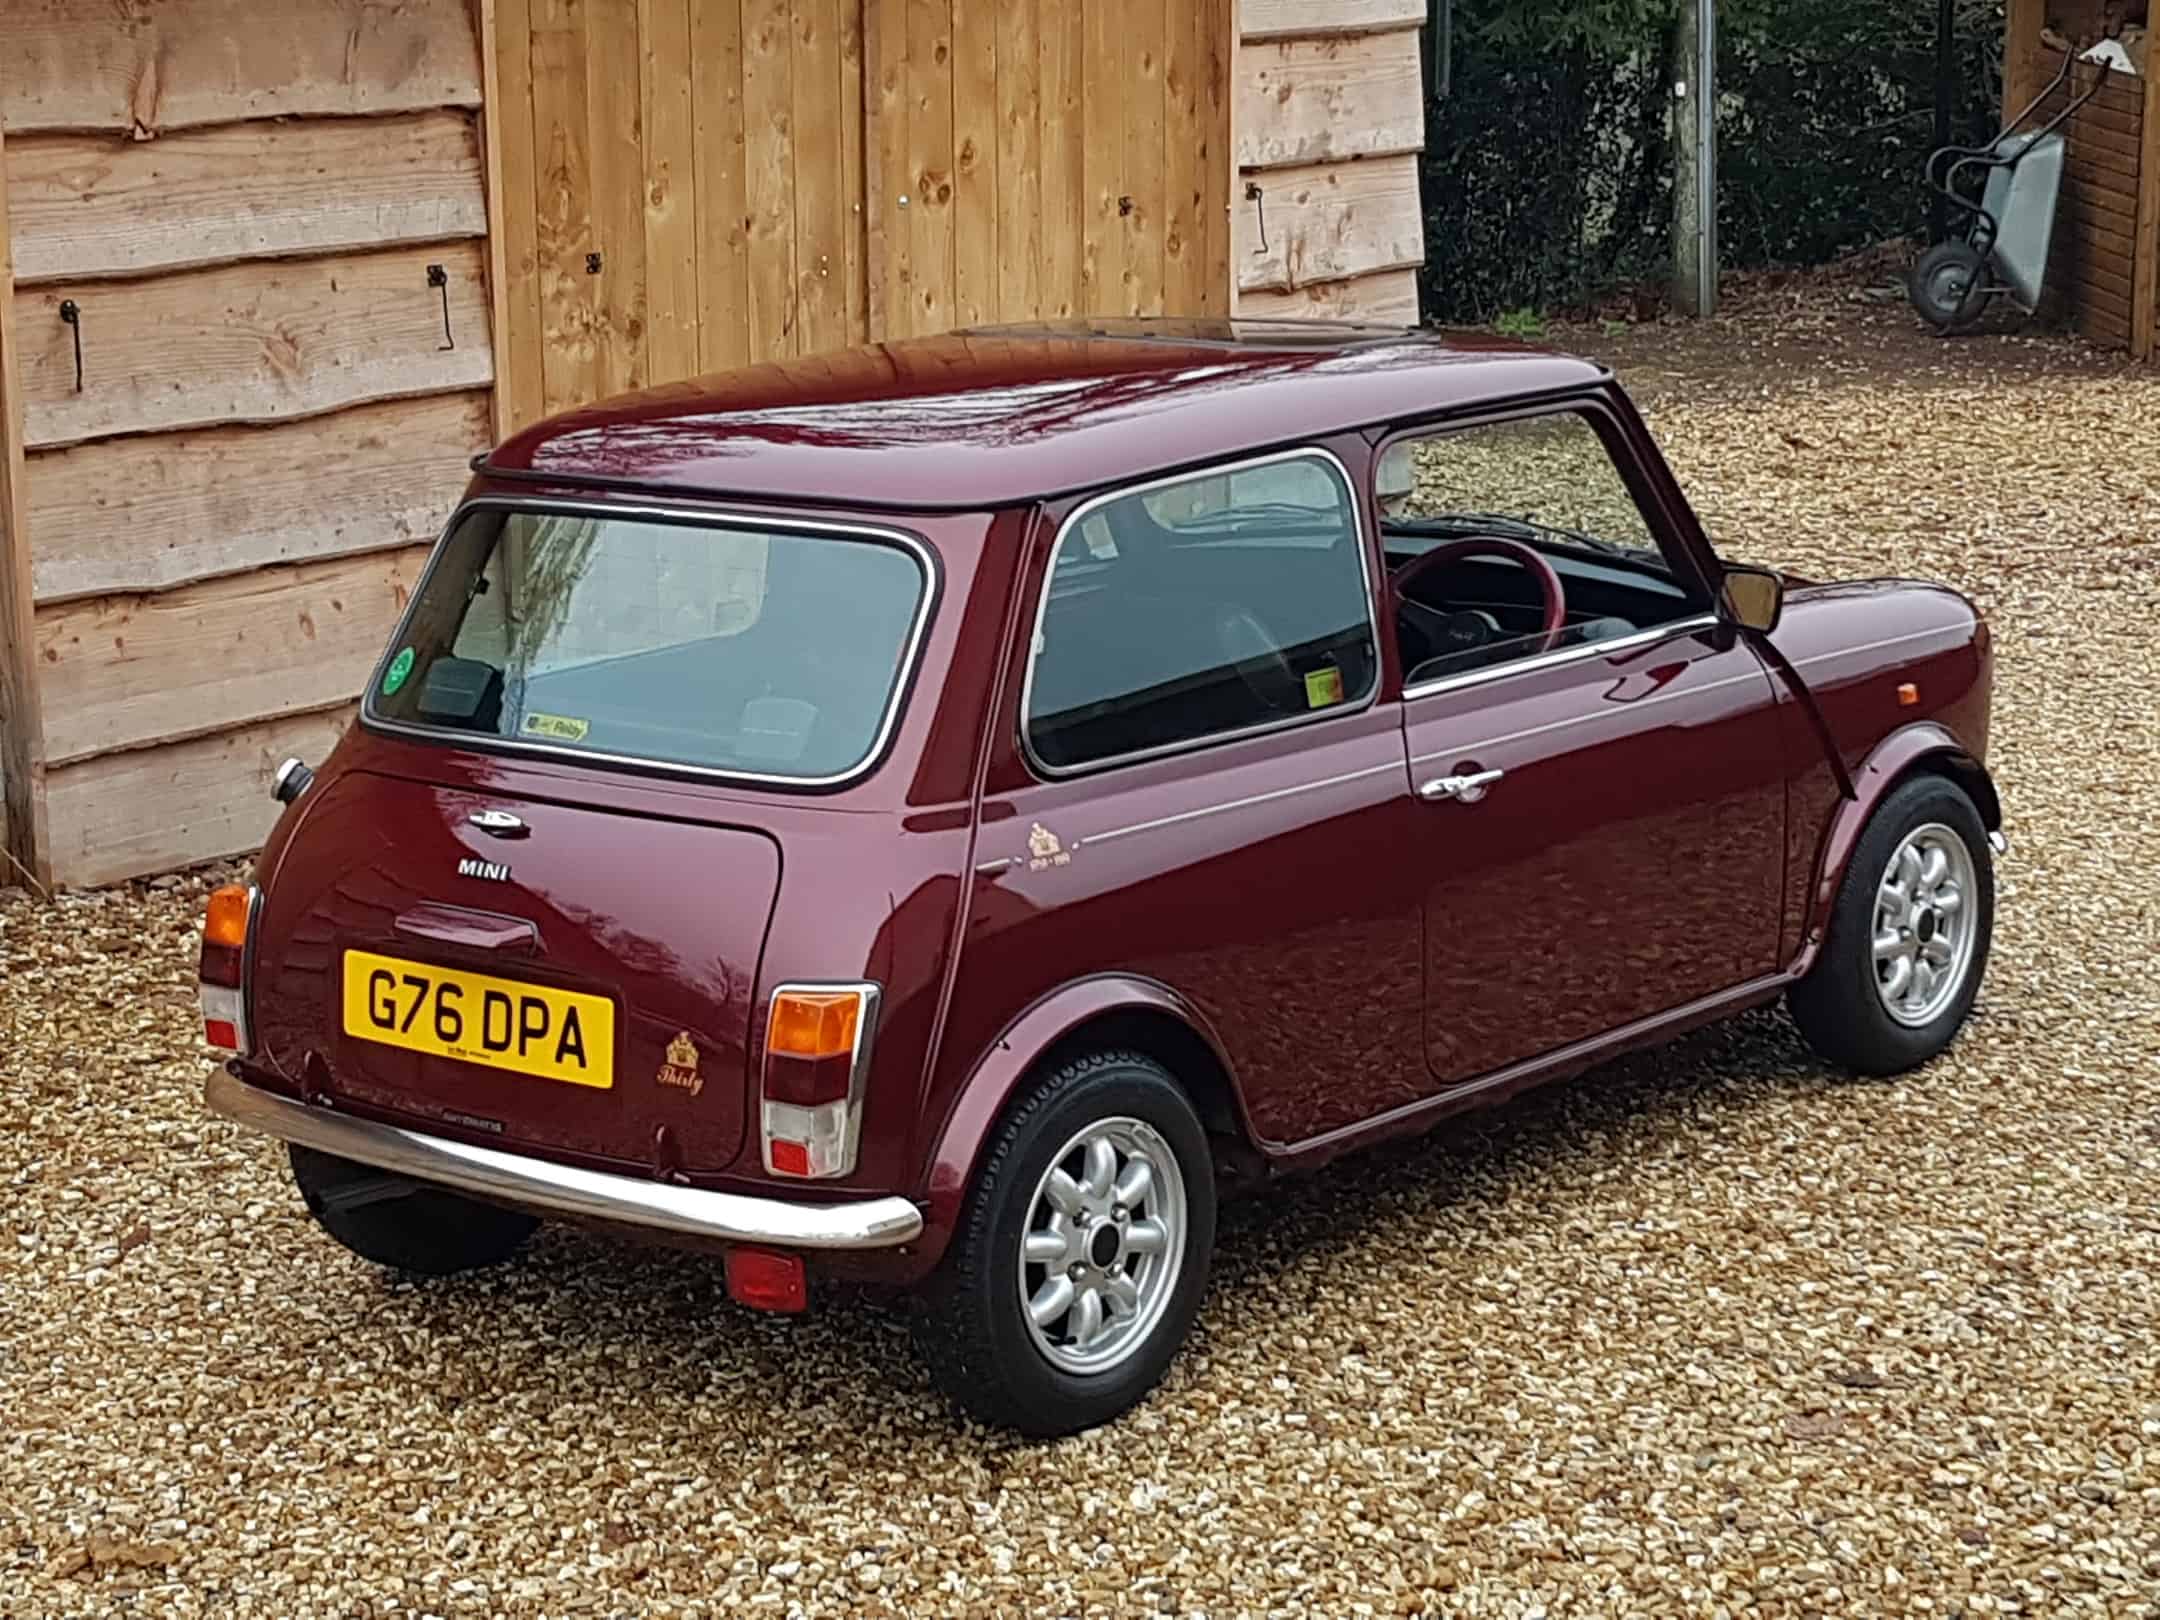 ** NOW SOLD ** 1989 Mini 30 Limited Edition Automatic On Just 12230 Miles in 31 Years!!